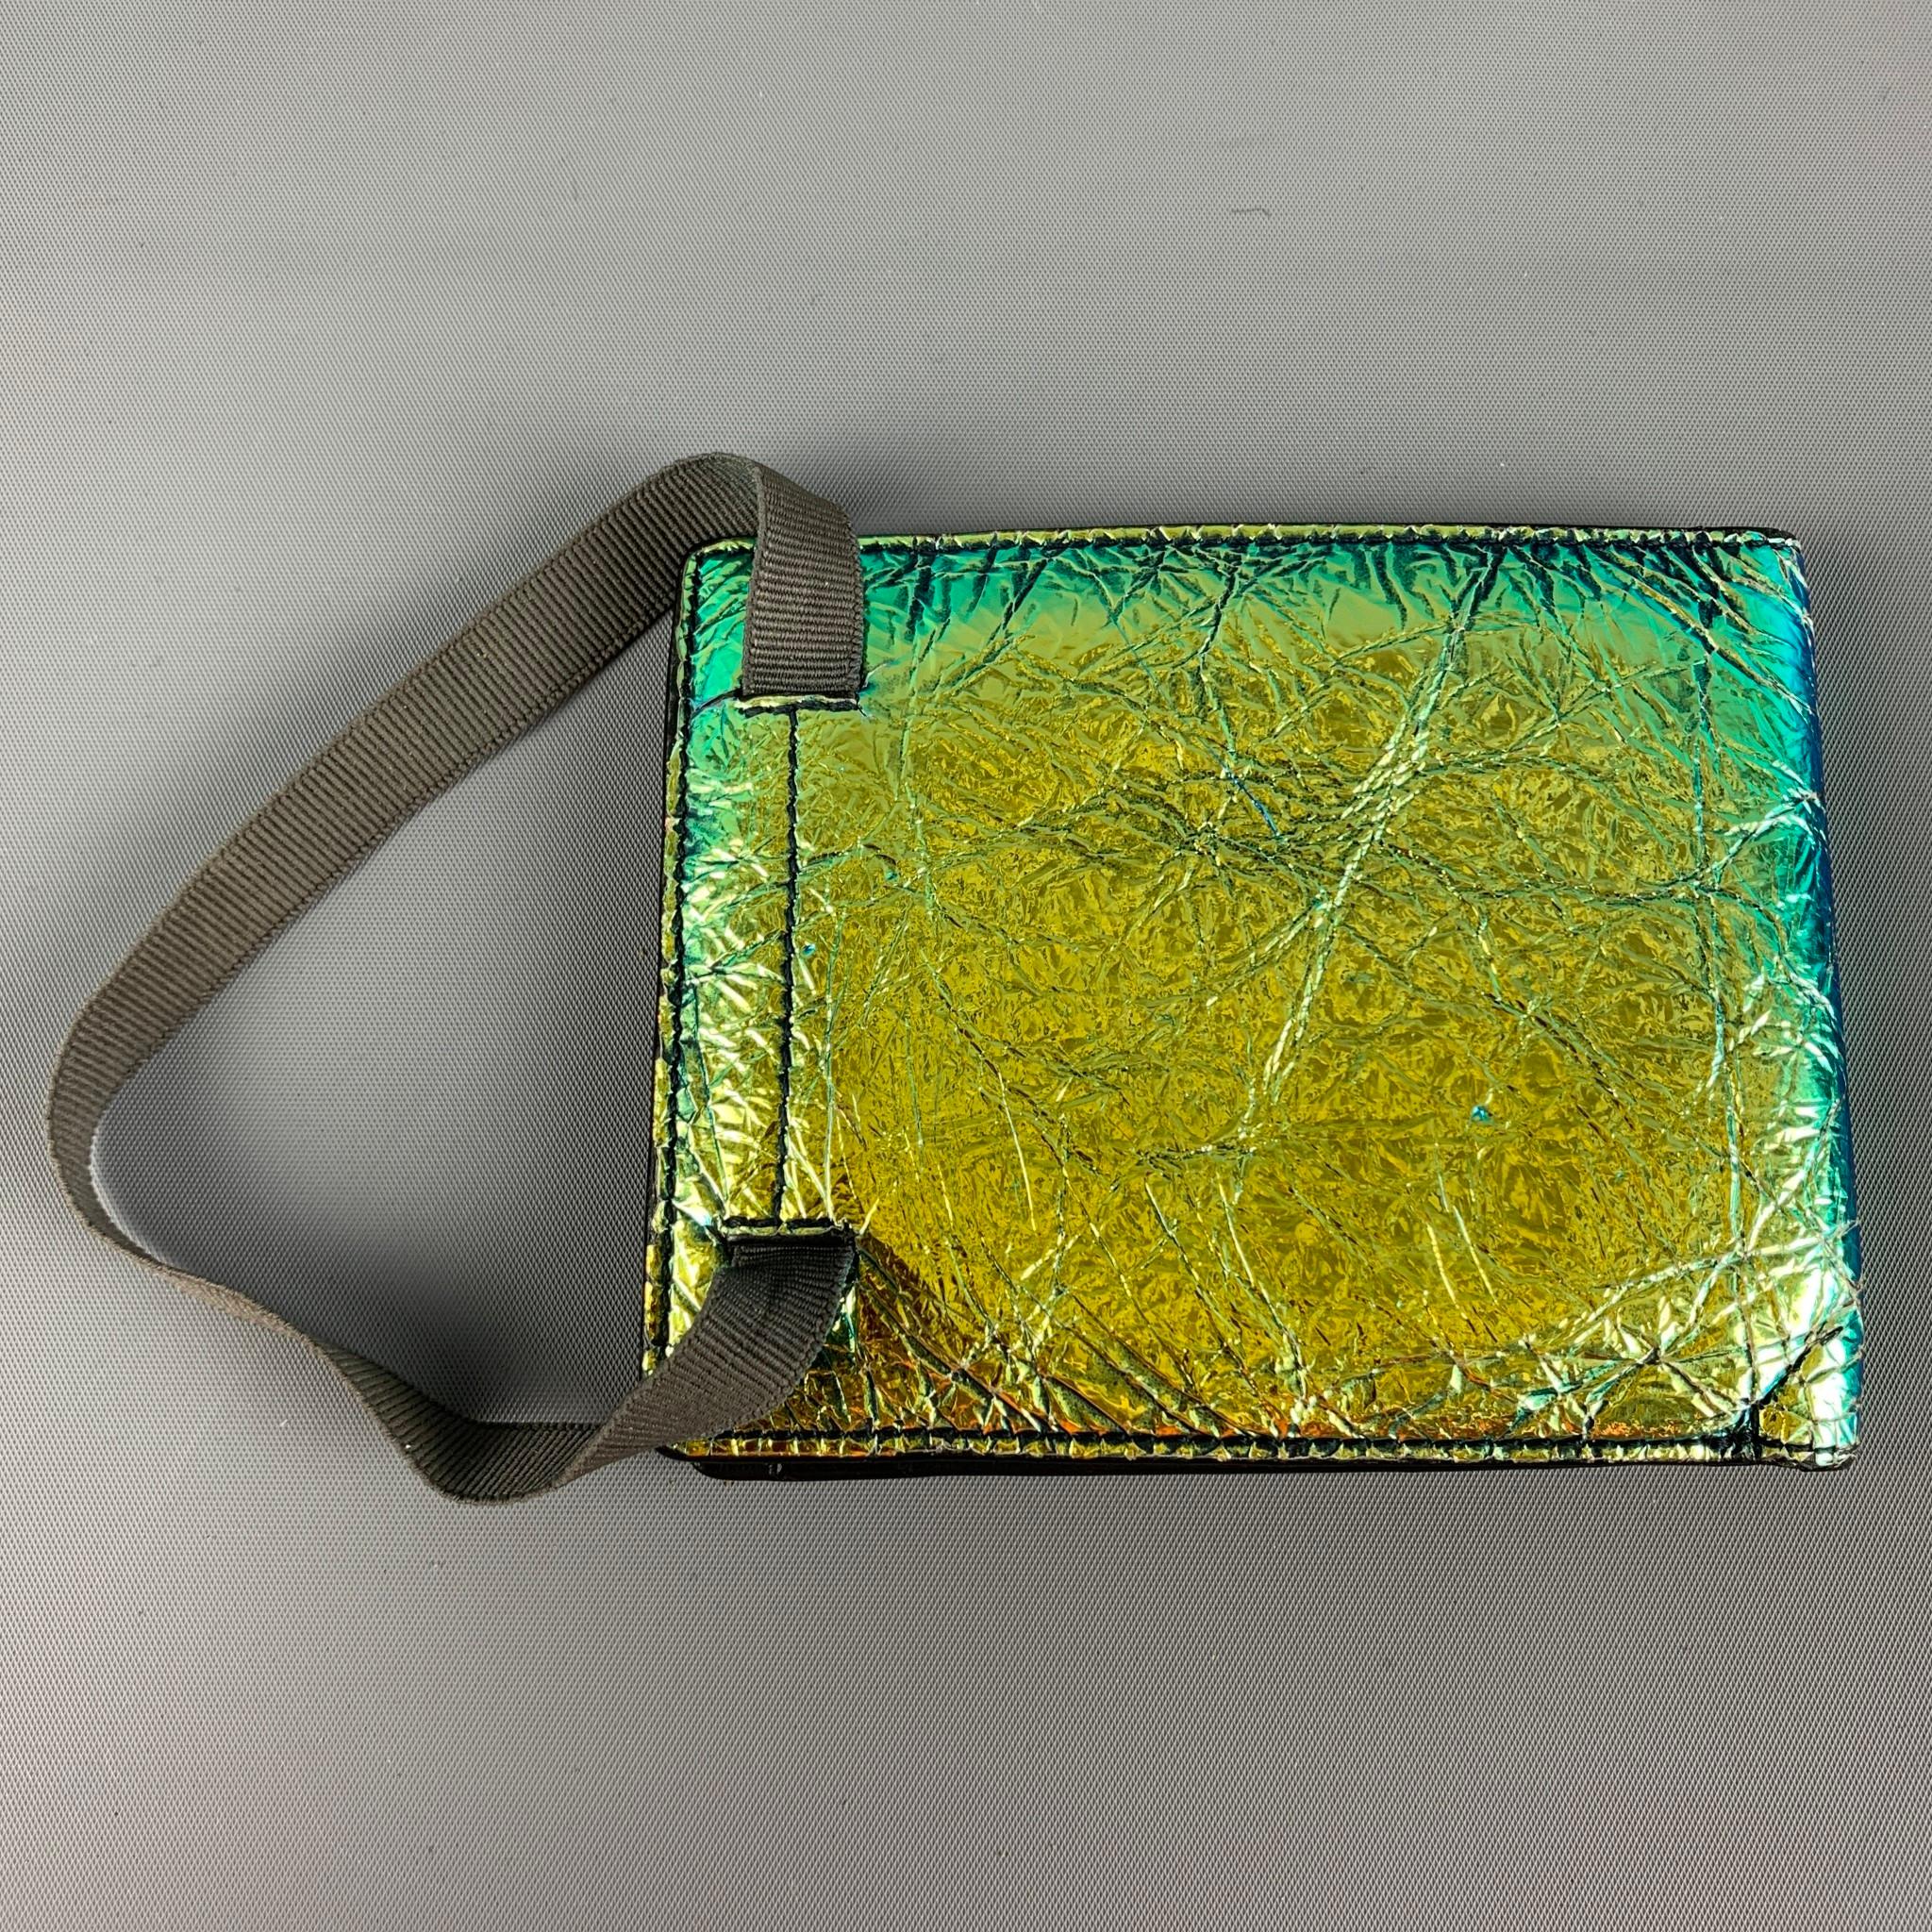 LANVIN wallet comes in a green & blue iridescent wrinkled patent leather featuring a elastic strap and inner slots. Includes box. 

Good Pre-Owned Condition. Light wear. As-is.

Measurements:

Length: 4.5 in.
Height: 3.6 in.